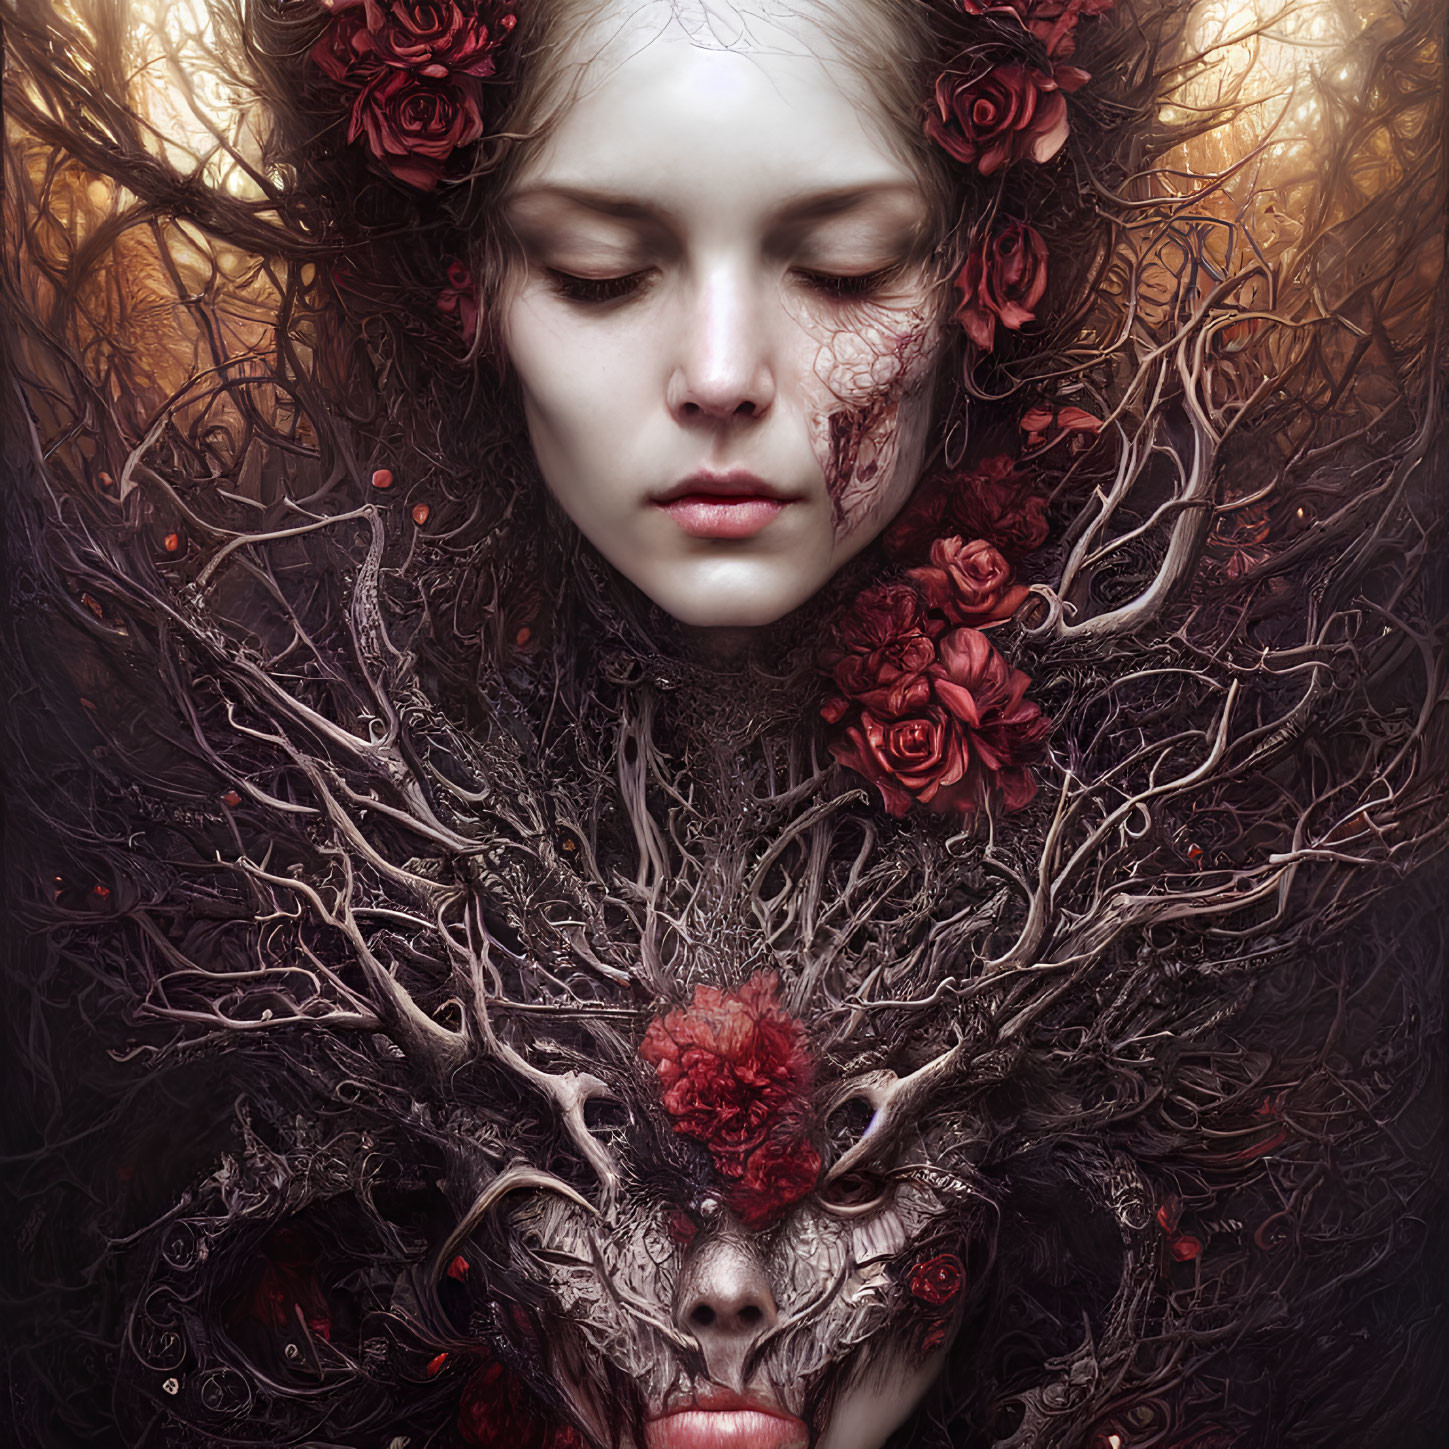 Woman with pale skin, closed eyes, dark branches, red roses, and floral mask reflection.